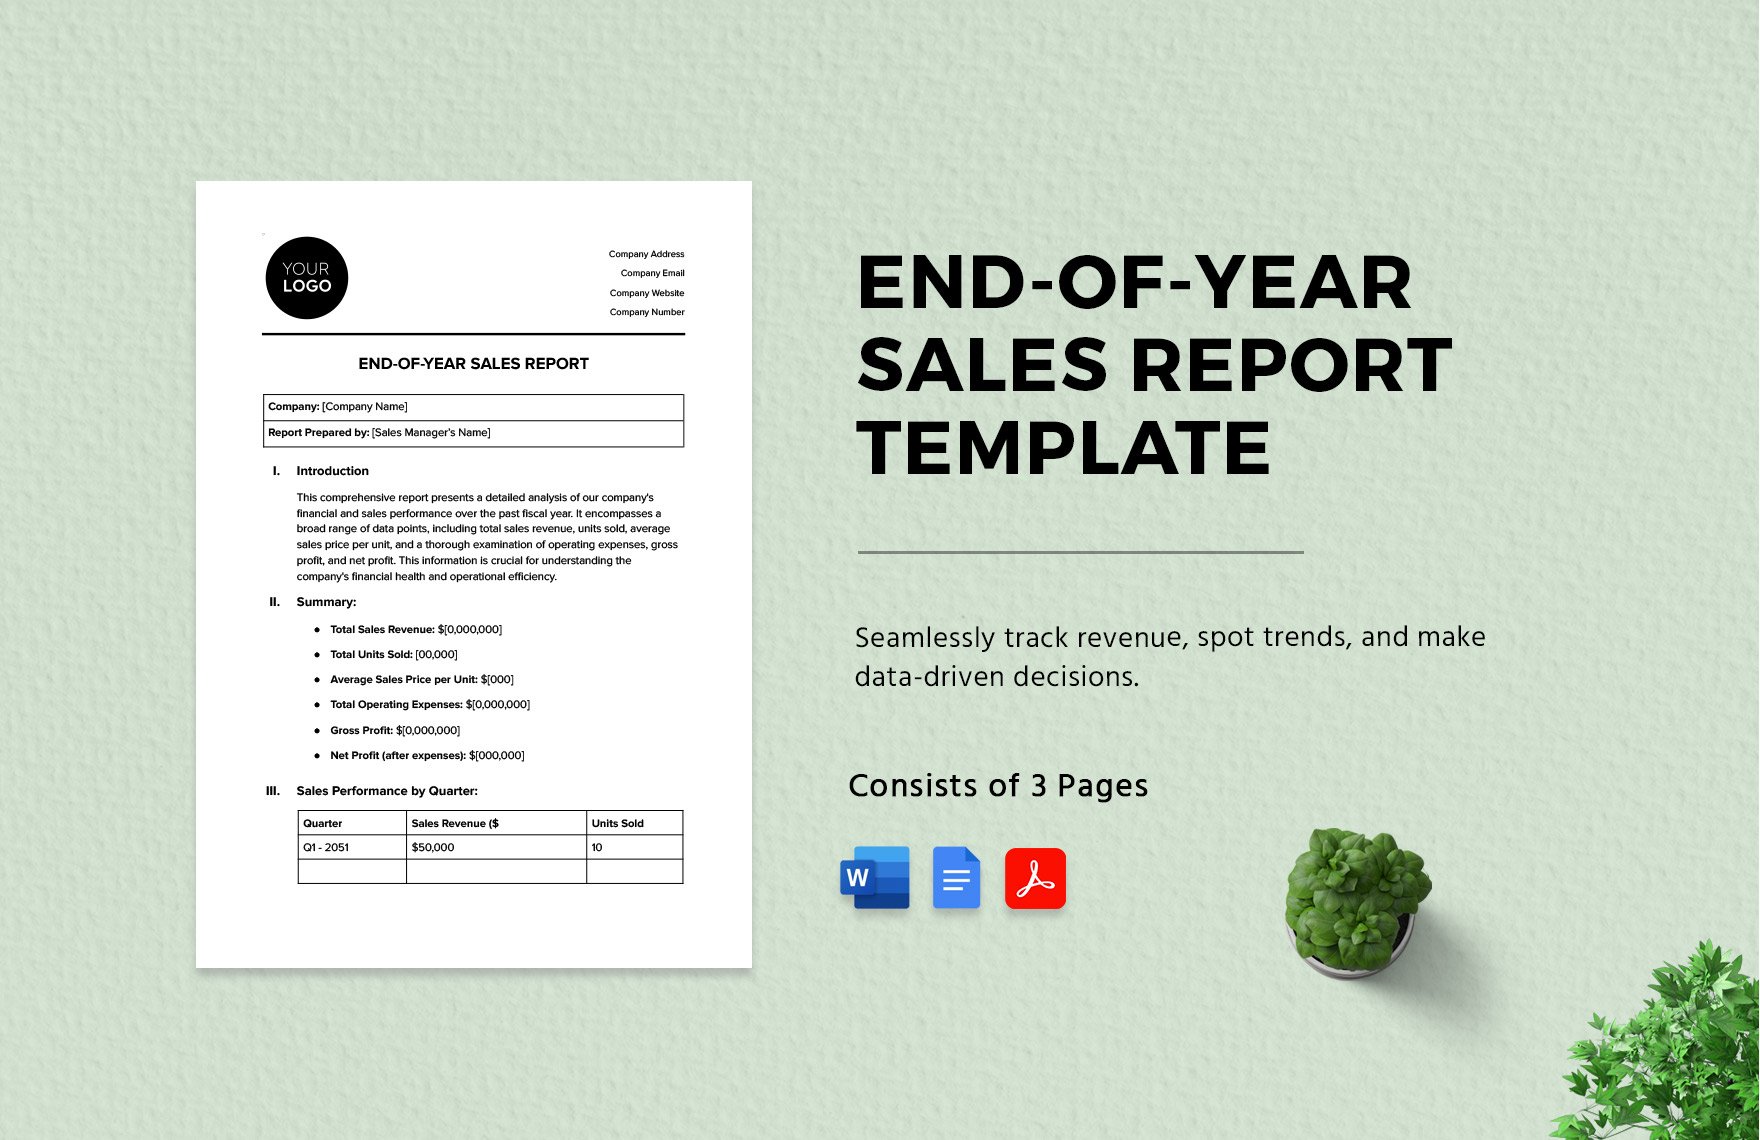 End-of-Year Sales Report Template